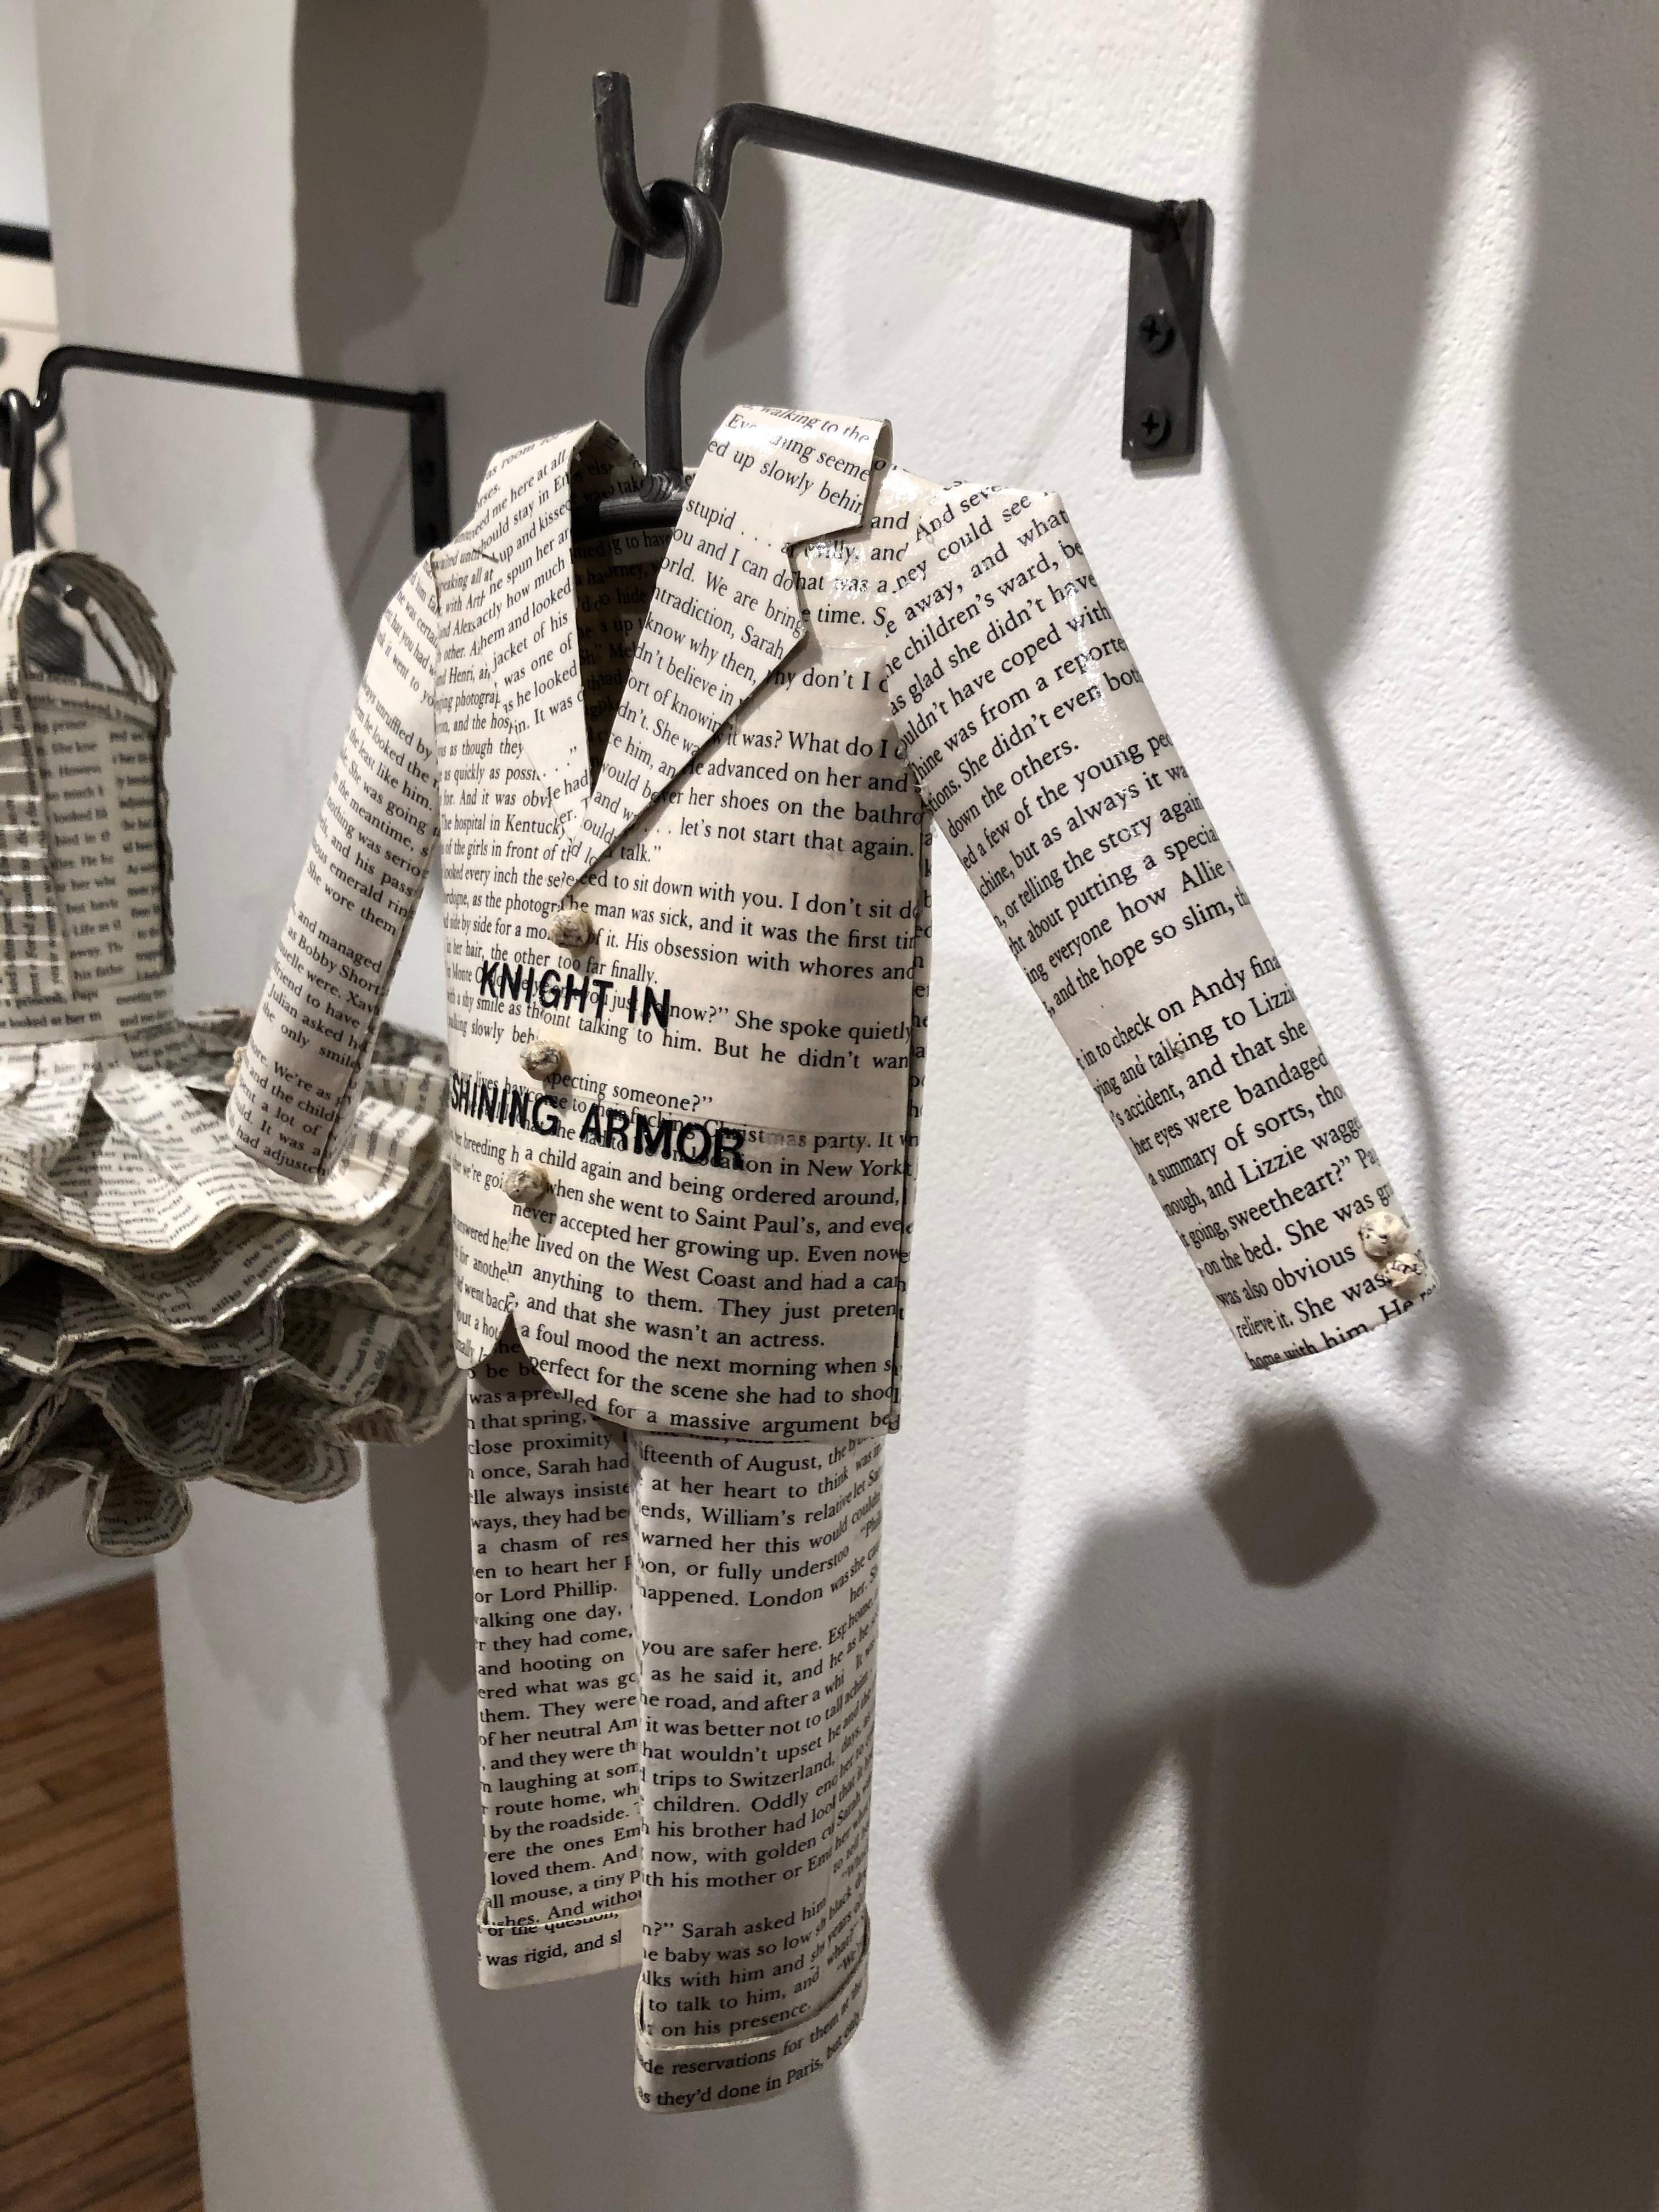 Knight In Shining Armor - Belle of the Ball, 2017, vintage romance novels, text, gel medium, acrylic spray, steel hanger and bracket, 26 x 16 x 10

Couple sculpture / suit and dress sculpture by Donna Rosenthal

New York-based artist Donna Rosenthal